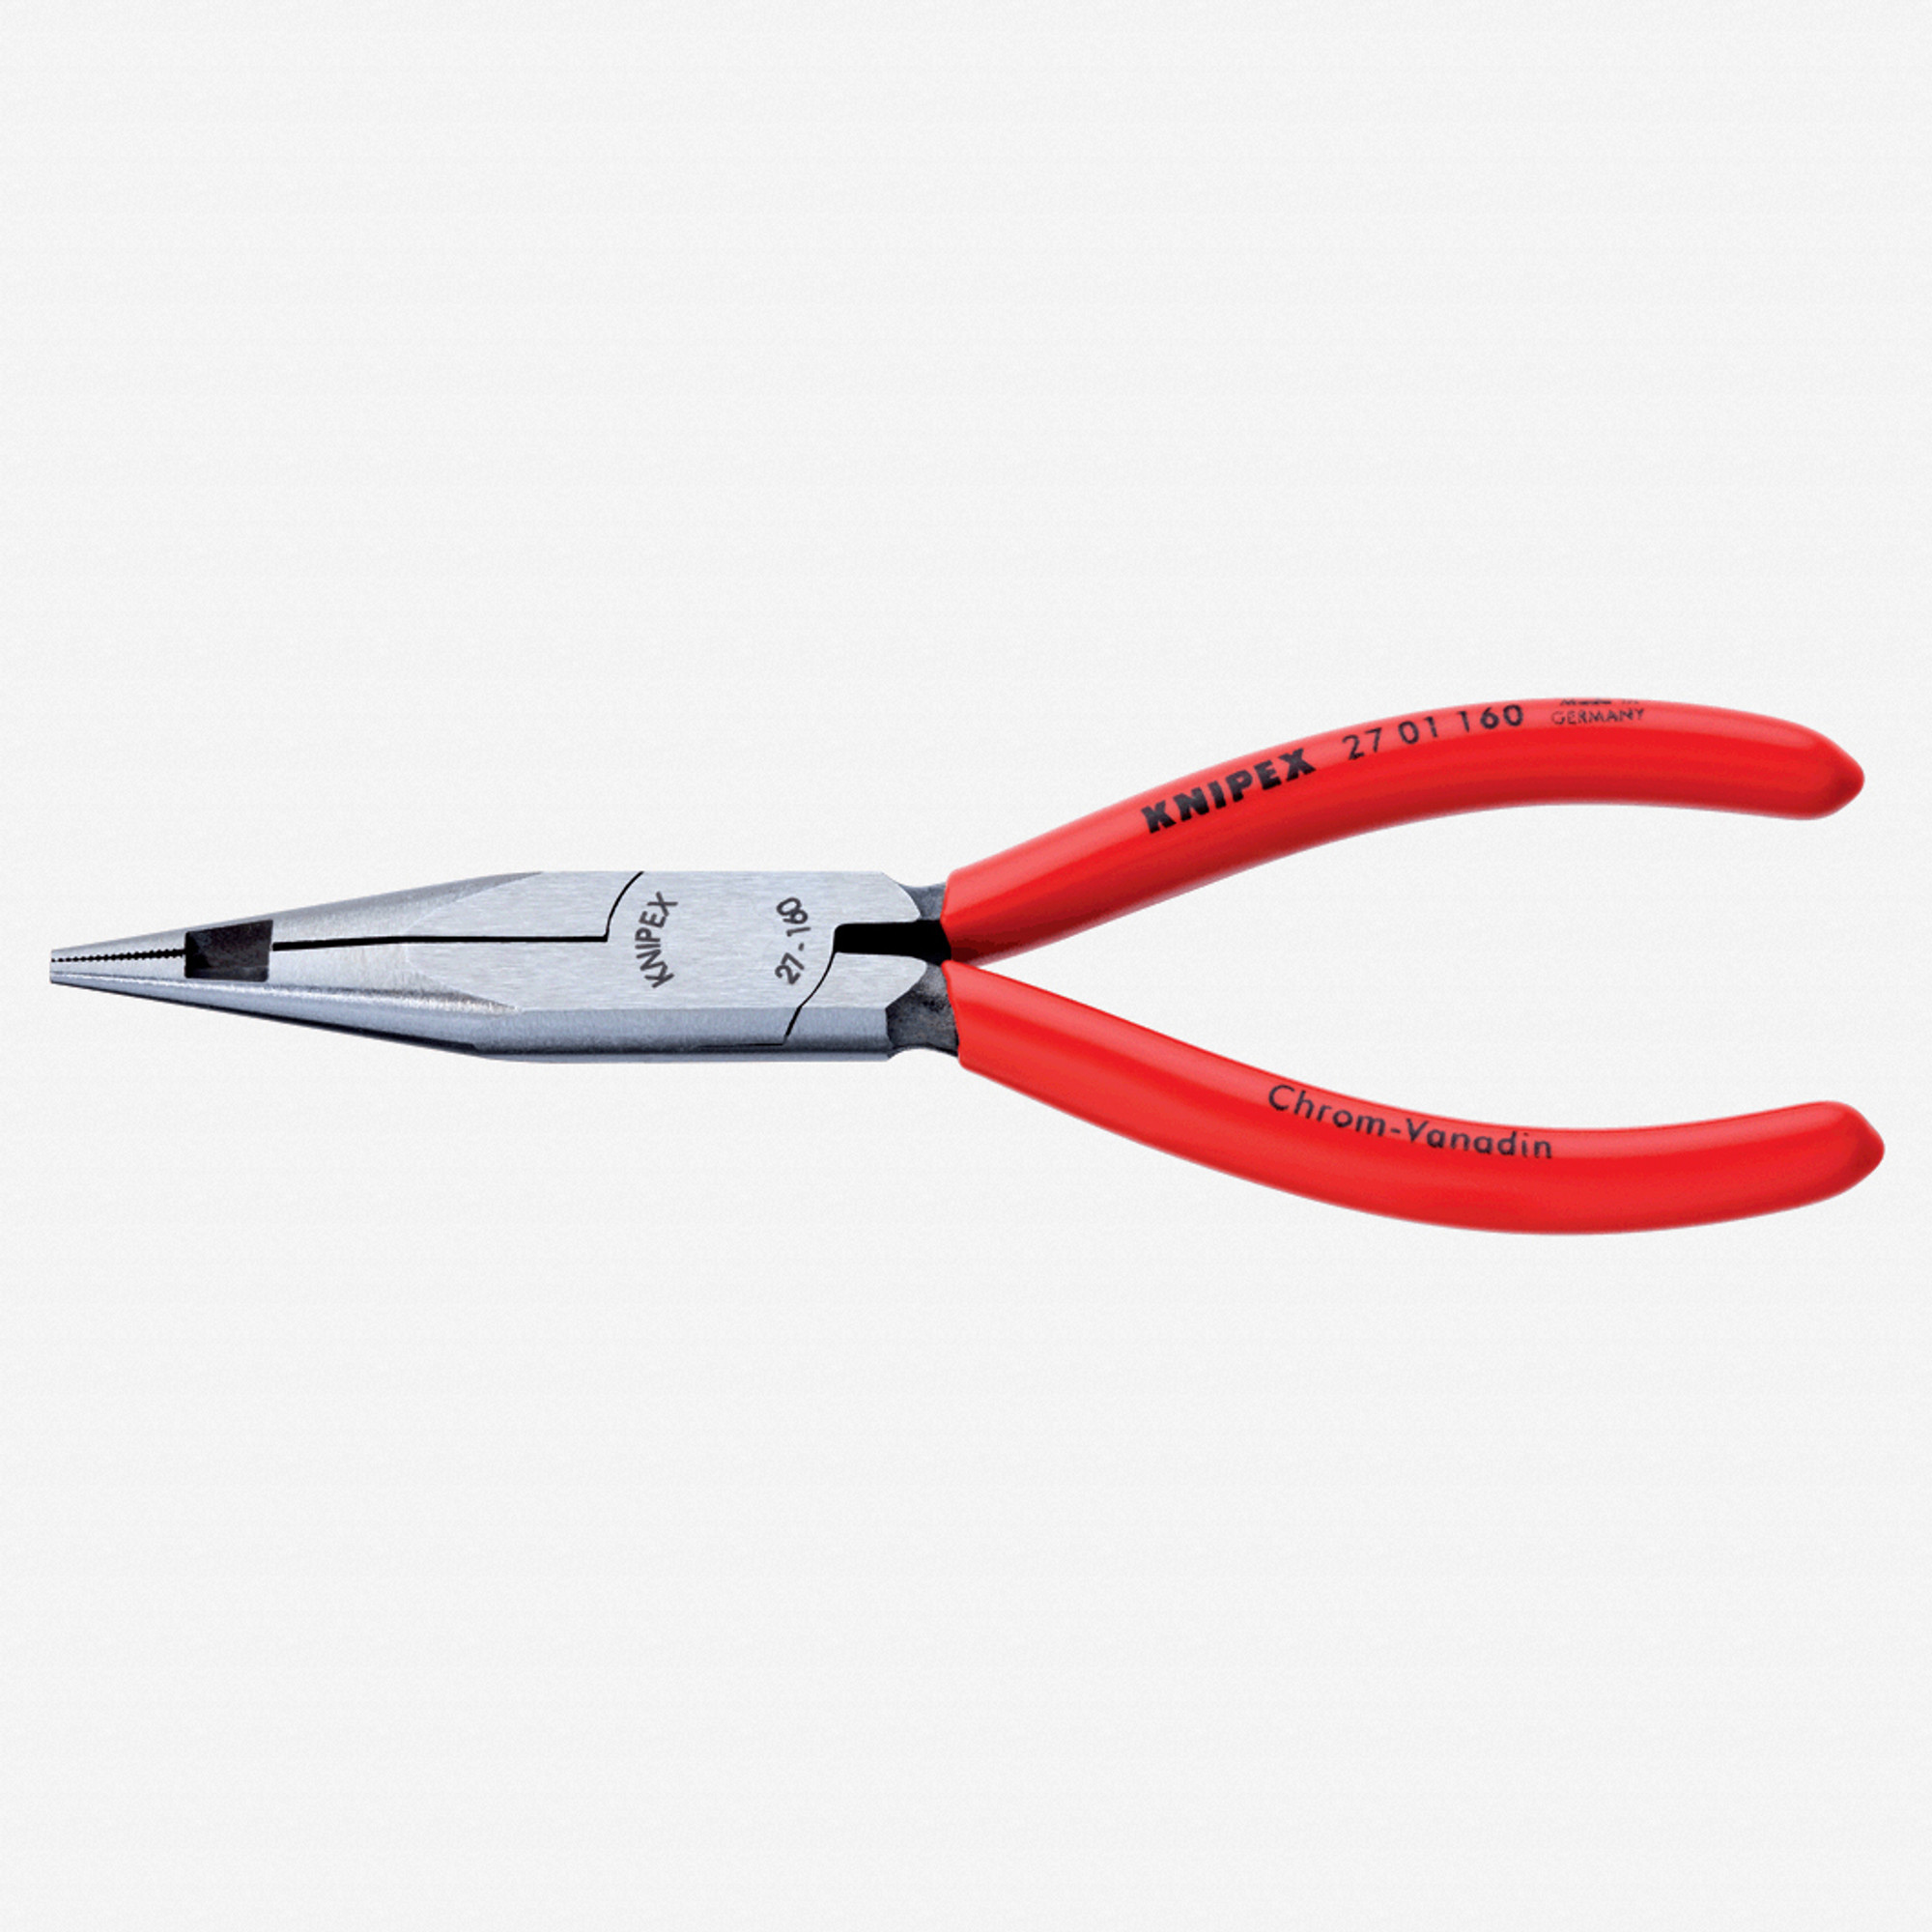 Knipex 31 11 160 Needle Nose Pliers